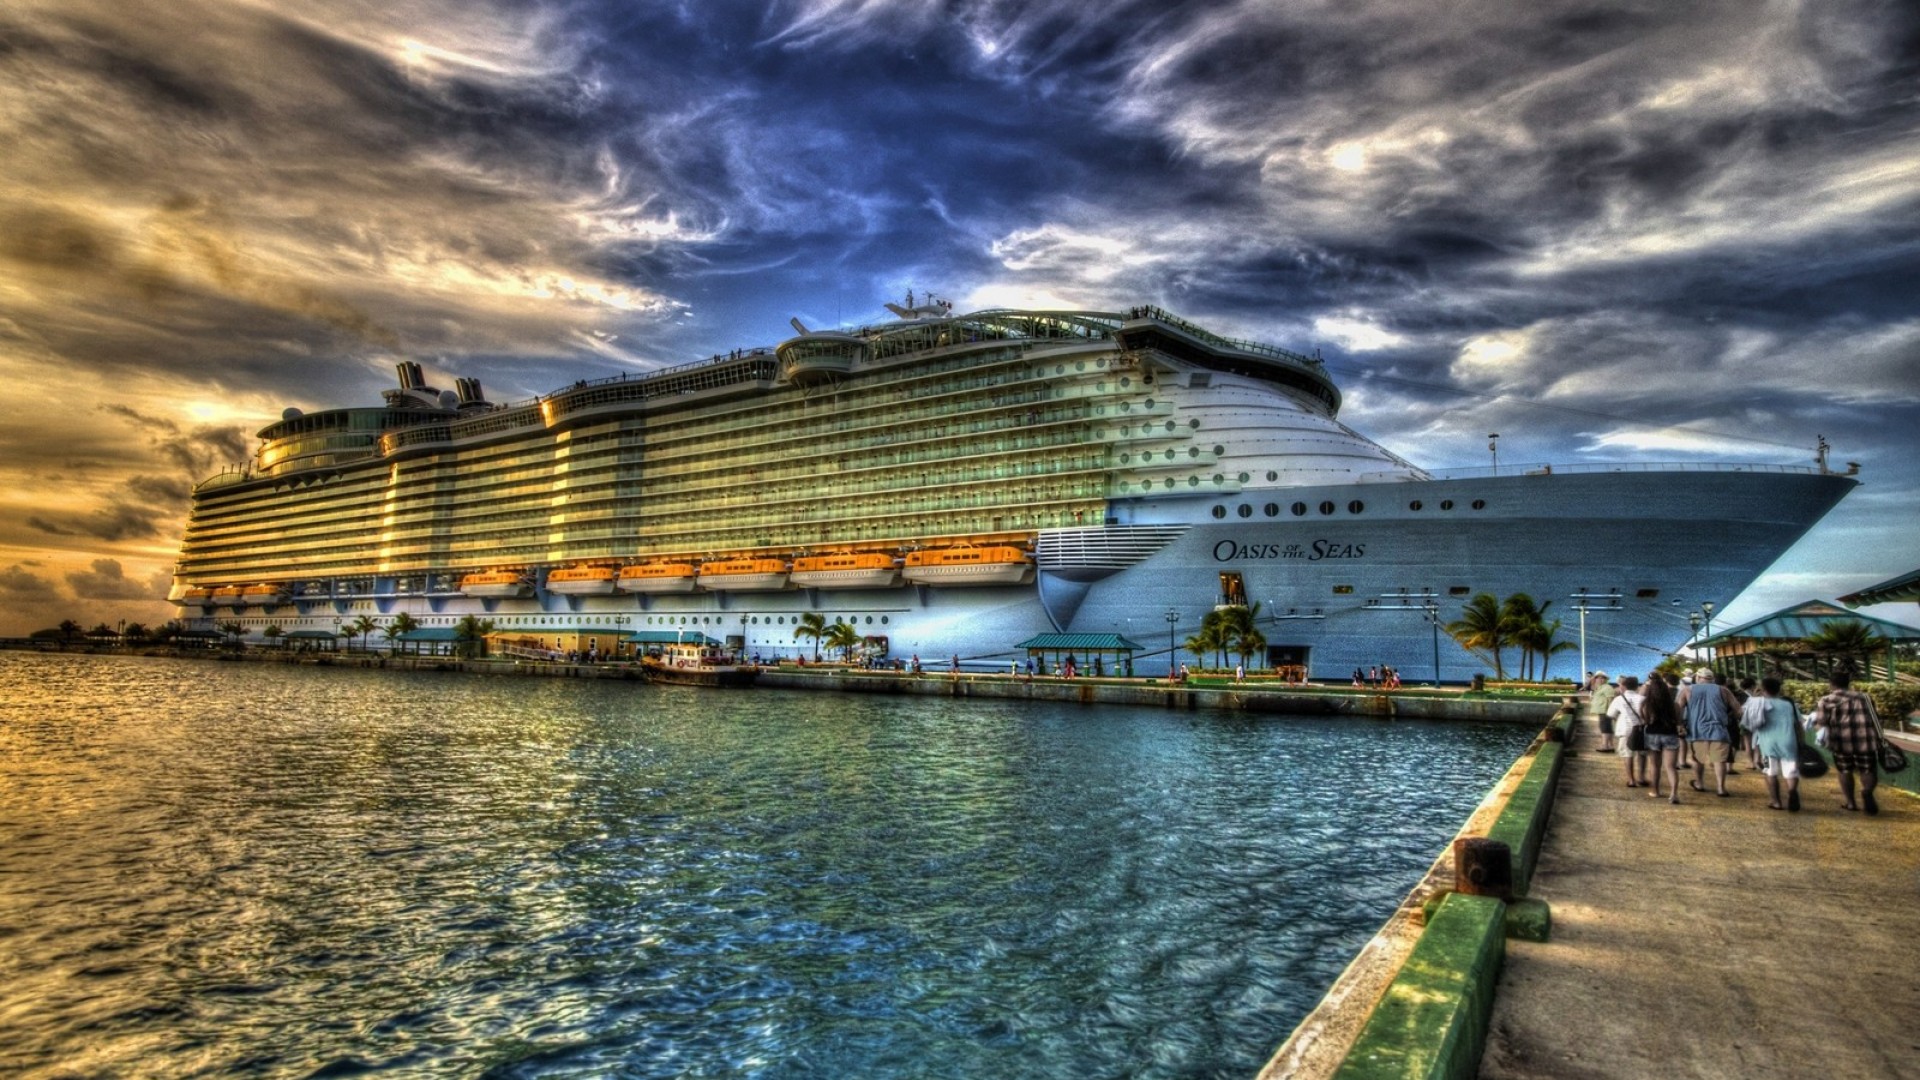  September 18 2015 By admin Comments Off on Cruise Ship Wallpapers HD 1920x1080